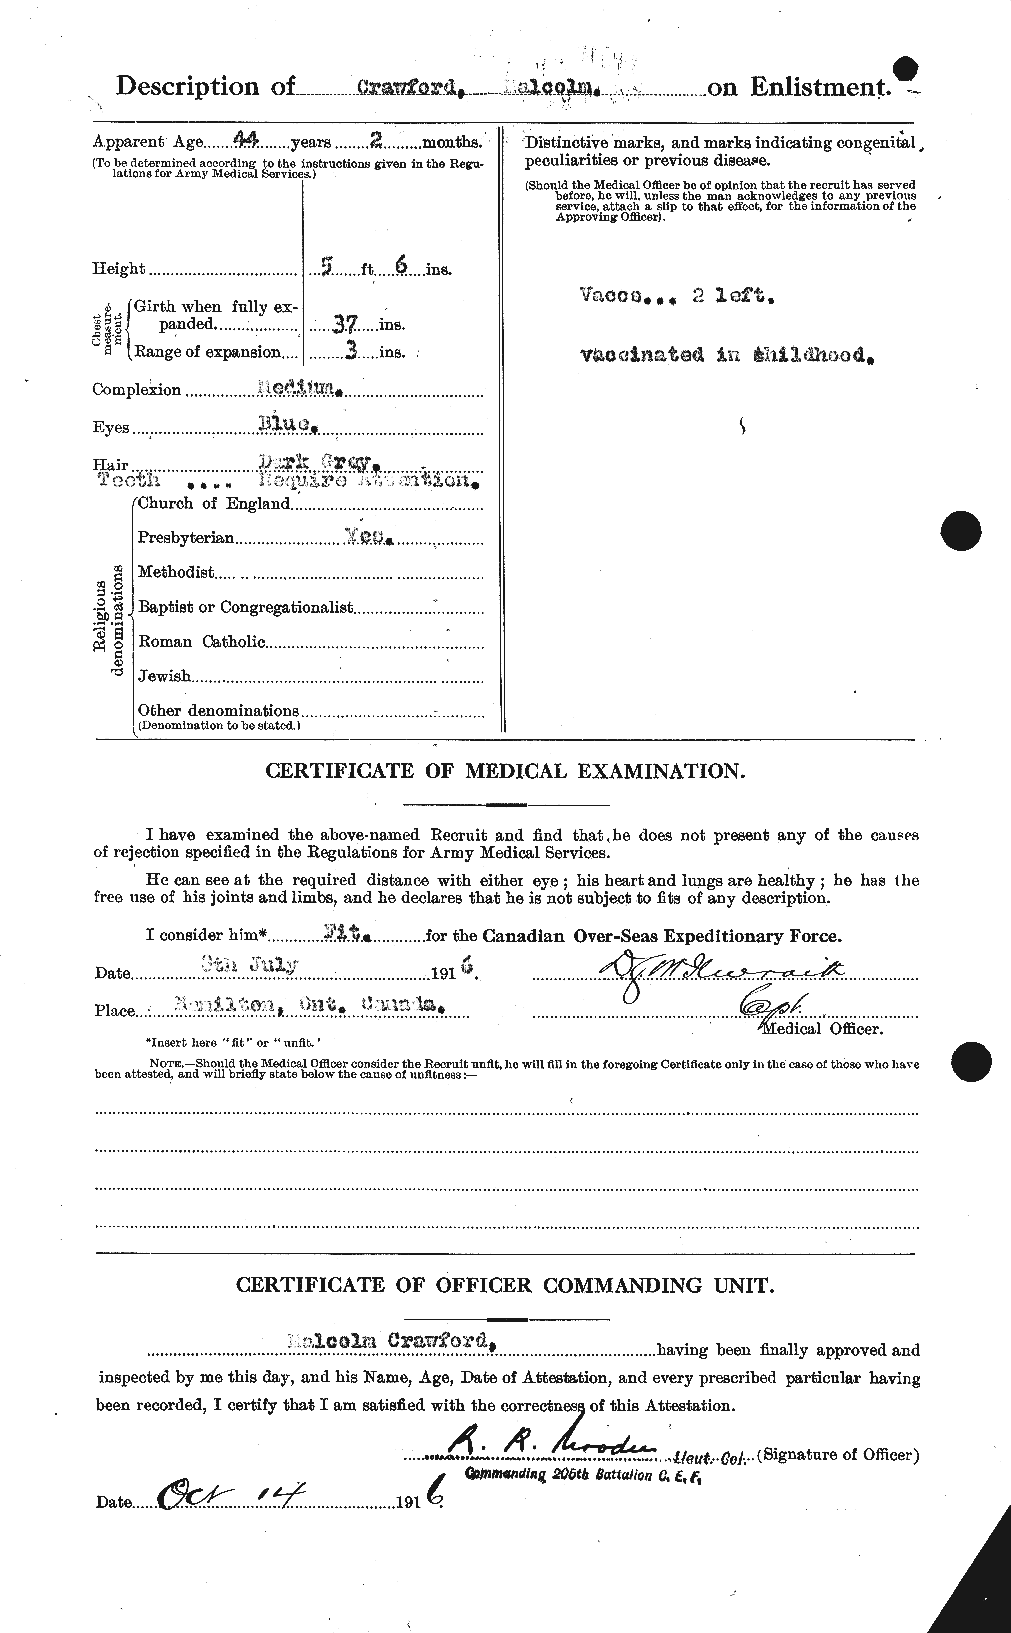 Personnel Records of the First World War - CEF 061786b